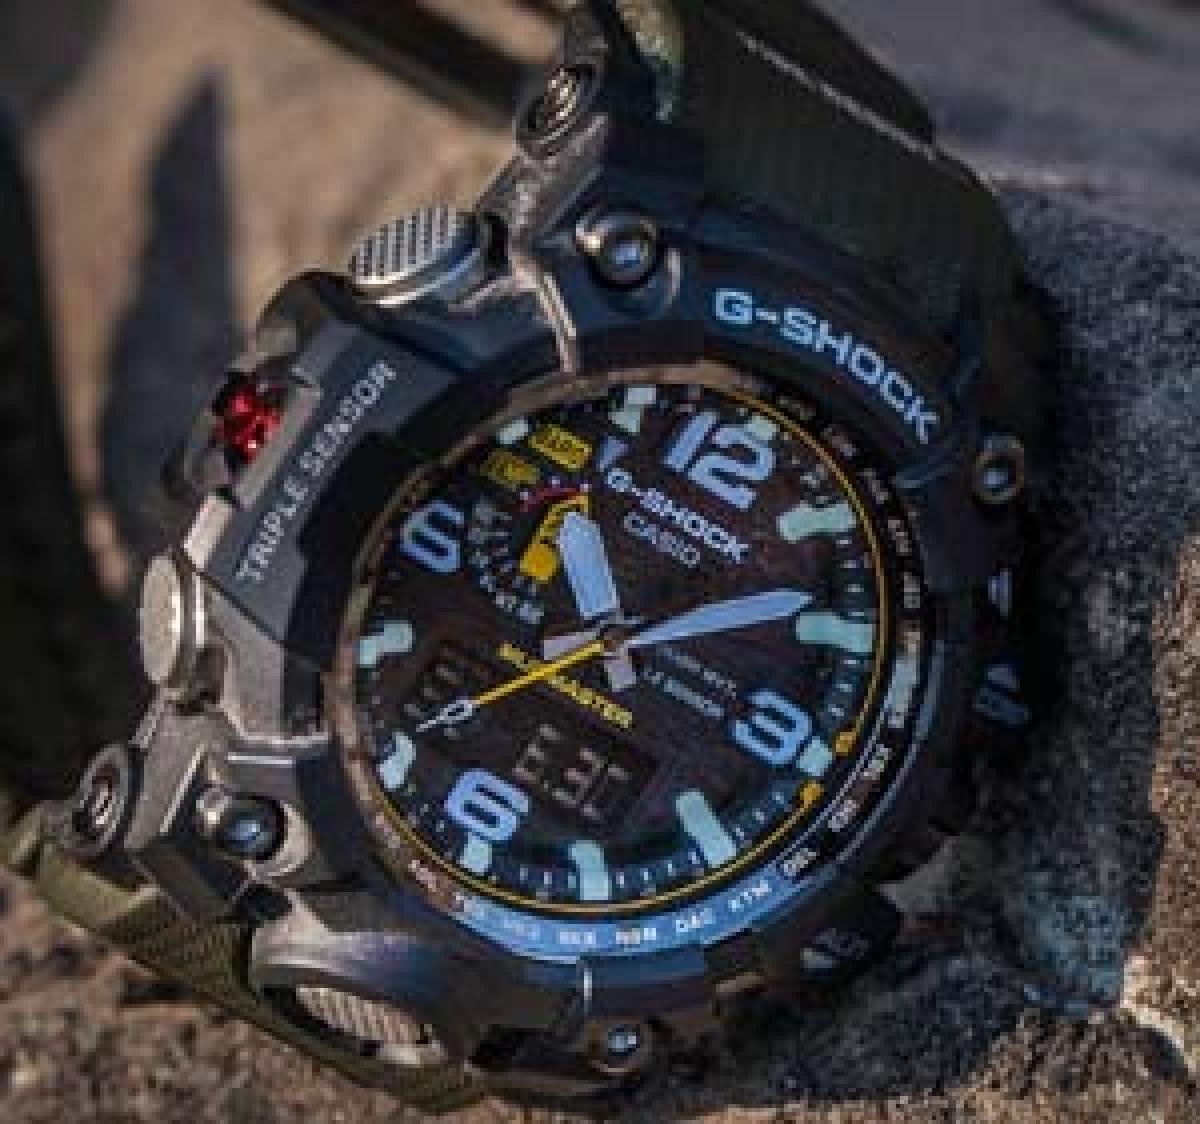 Casio G-Shock GWG-1000: styled with technology and toughness